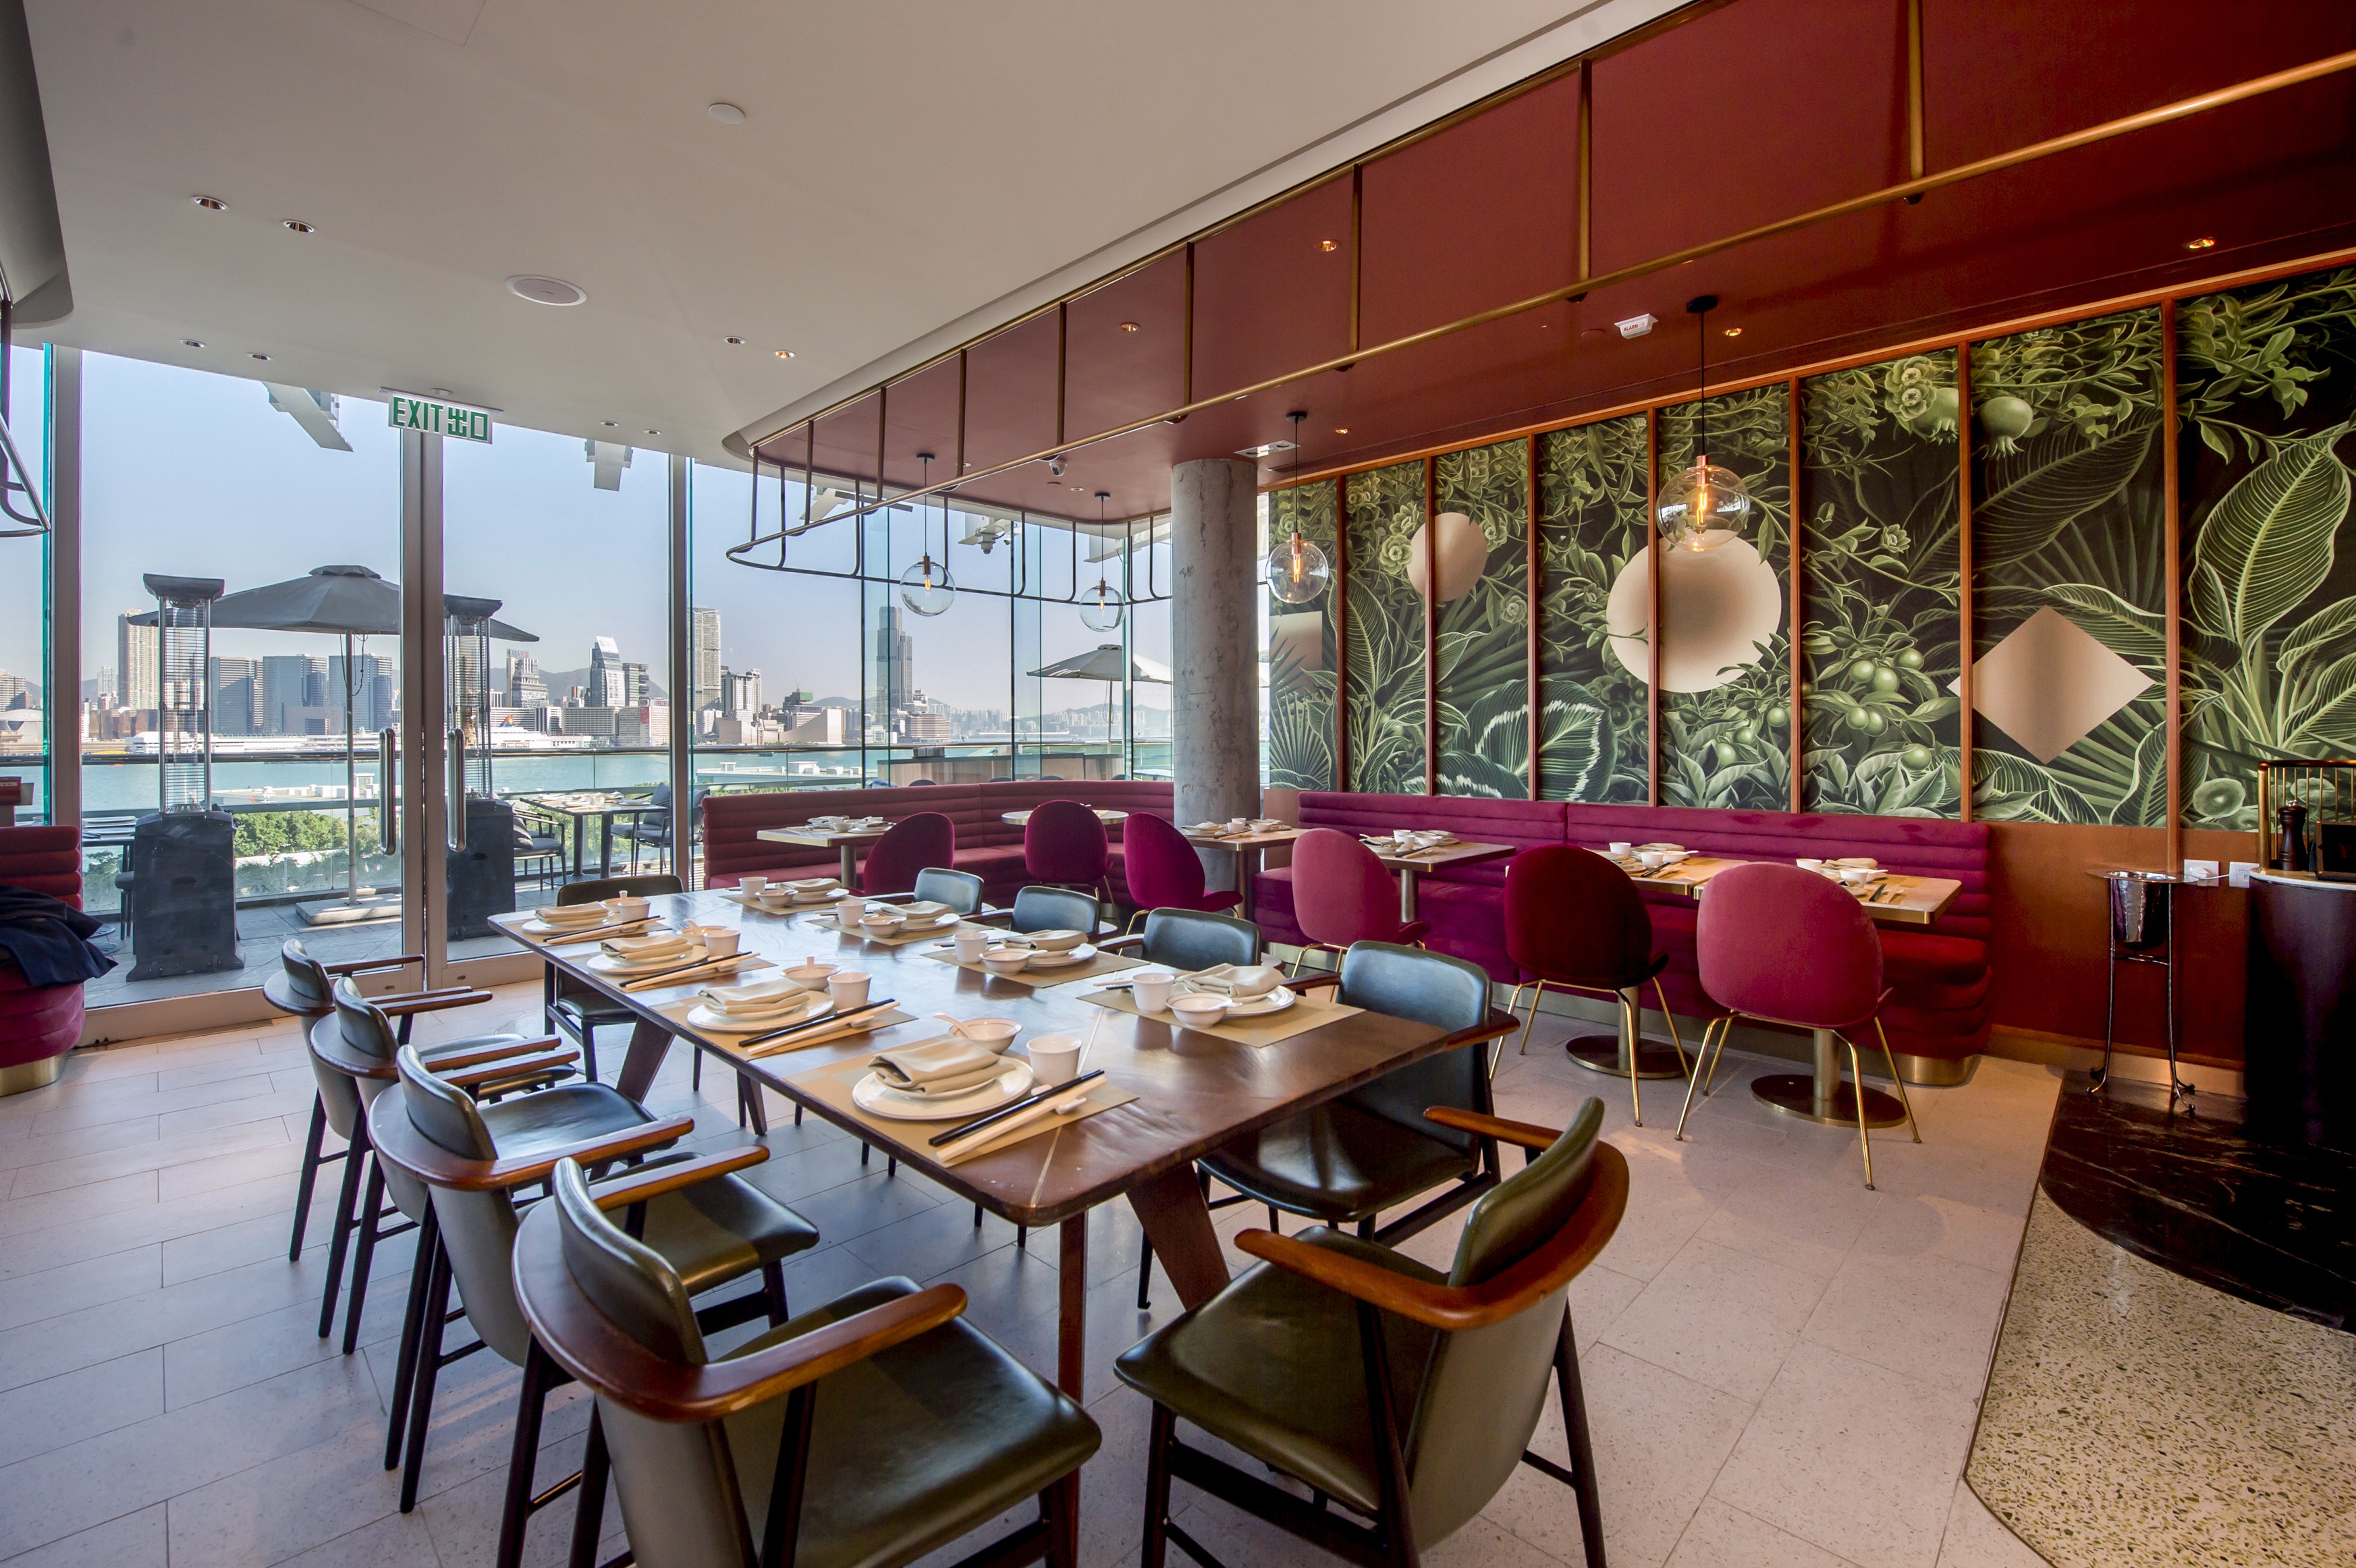 Smoky marsala red and shades of green create a cosy interior at Shè restaurant at Lane Crawford, IFC Mall, Central.